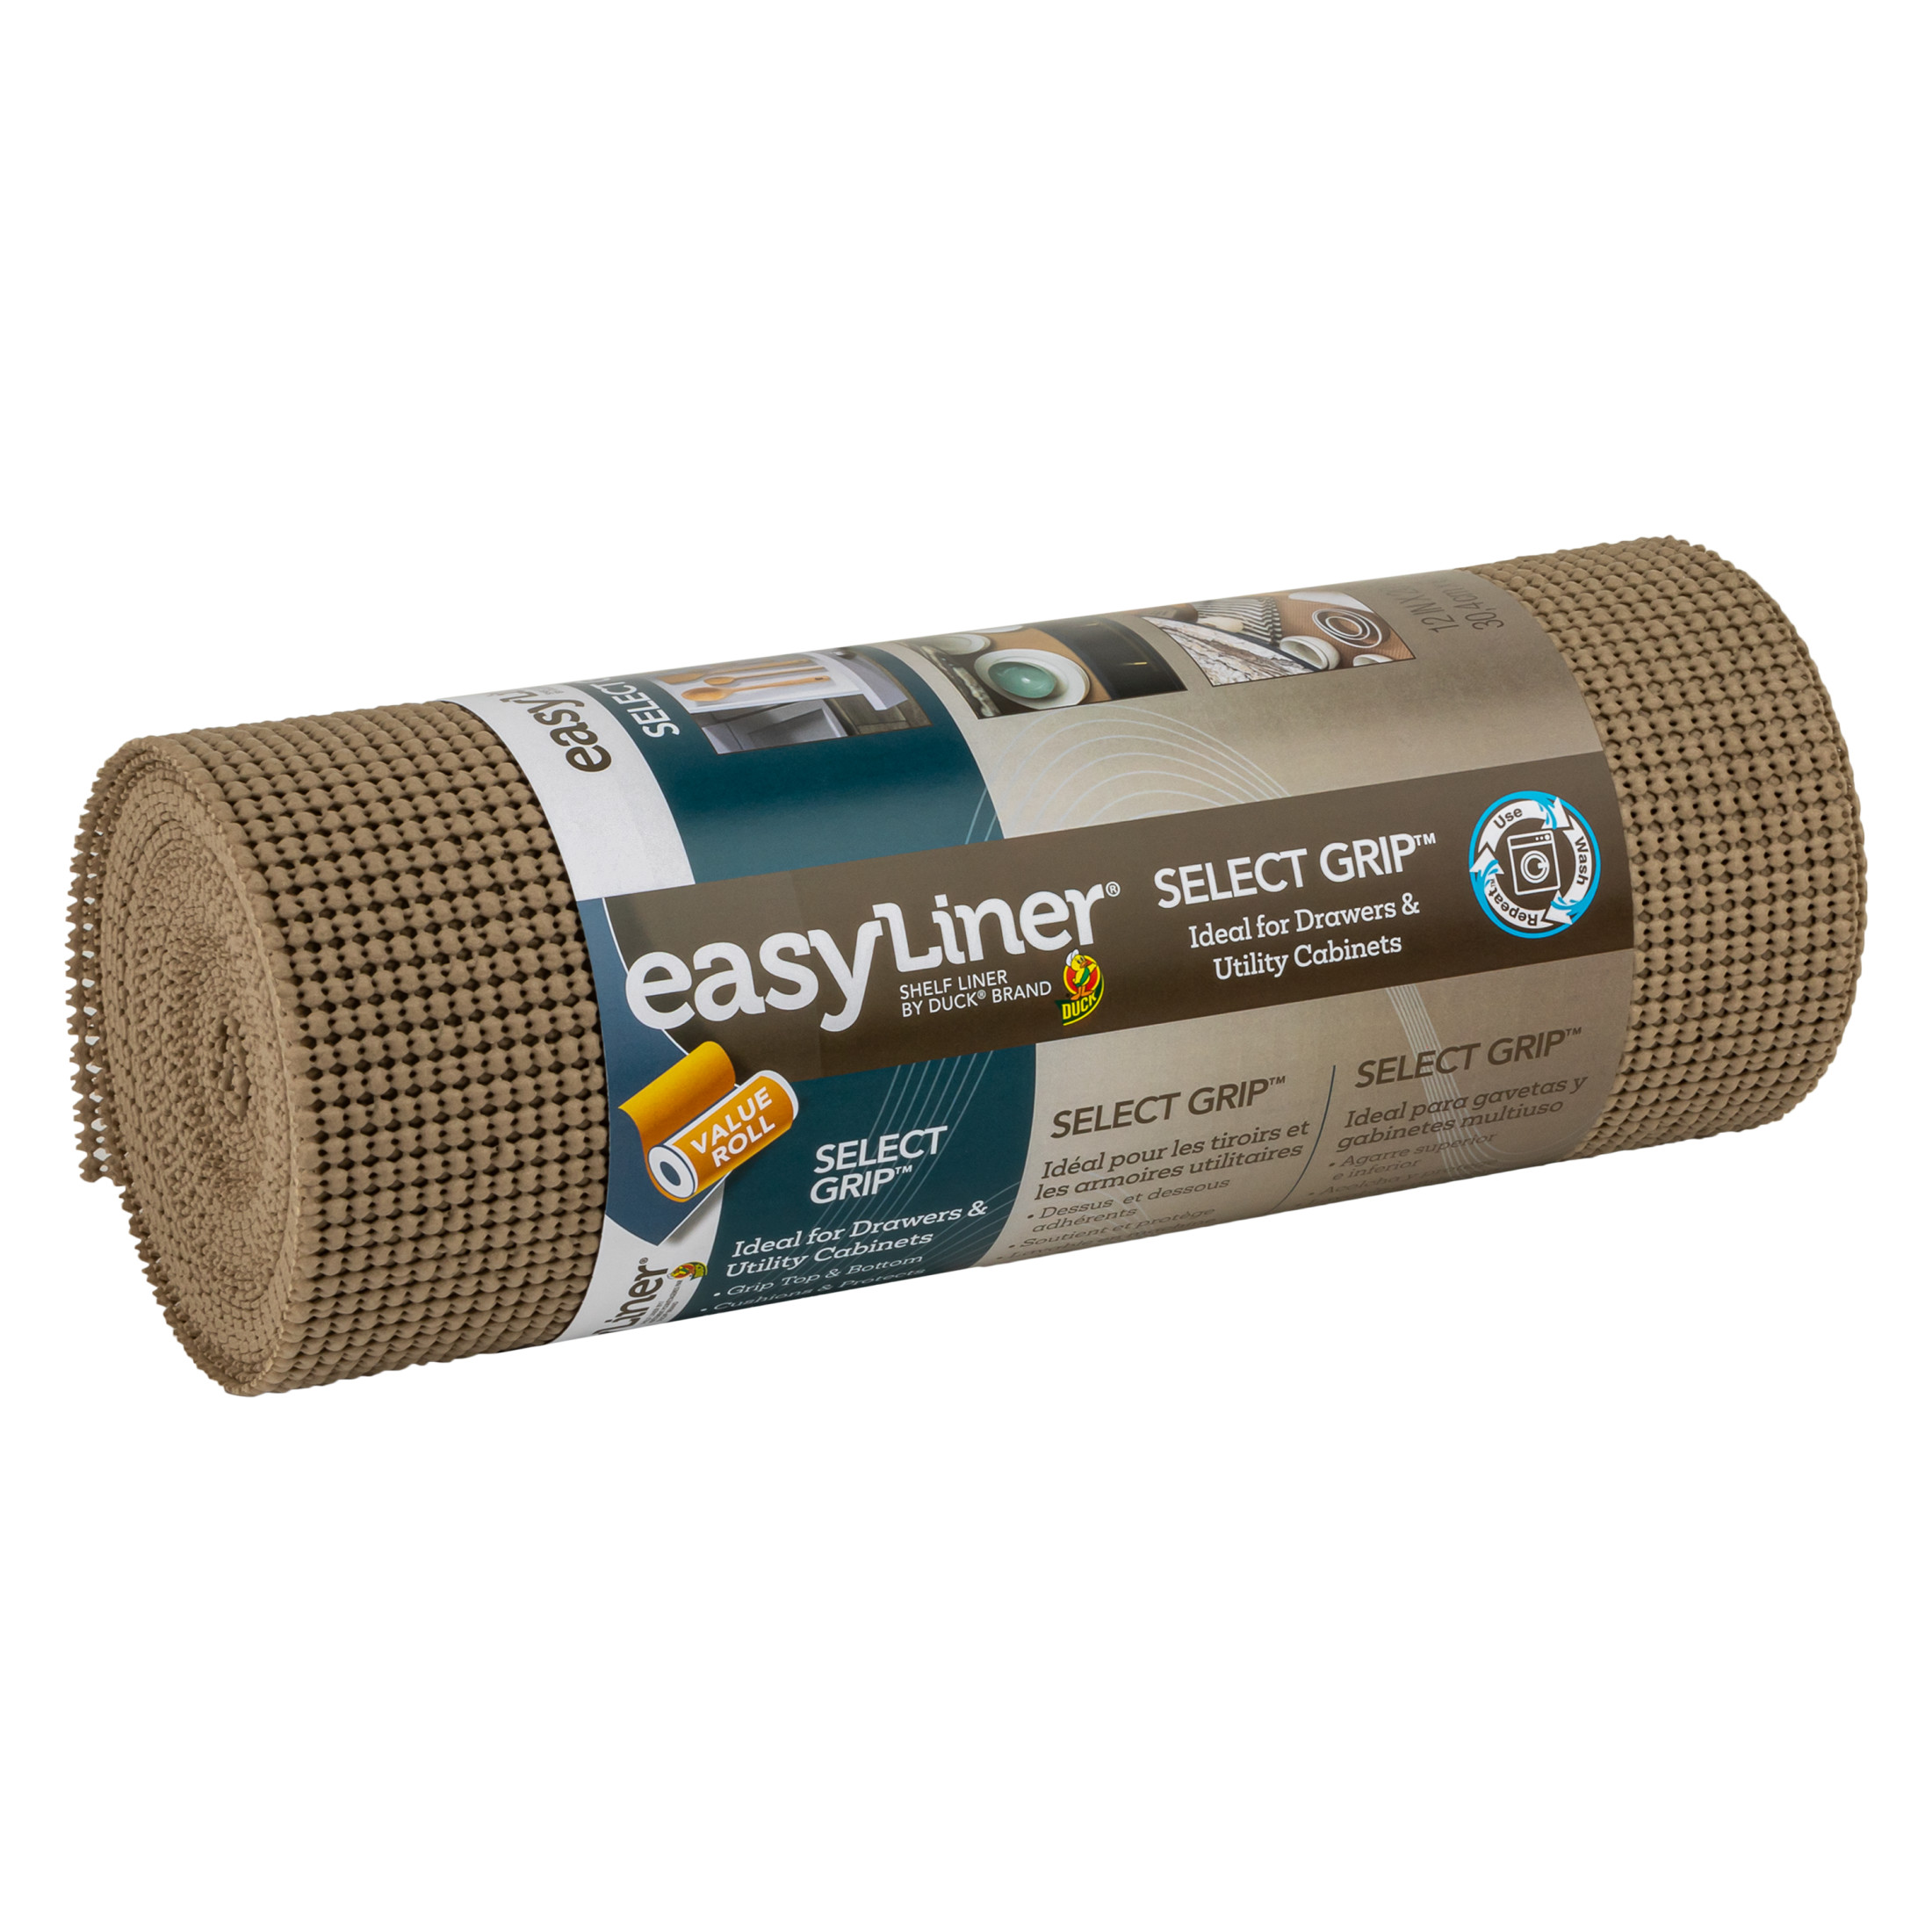 EasyLiner Select Grip Shelf Liner, Taupe, 12 in. x 20 ft. Roll - image 3 of 11